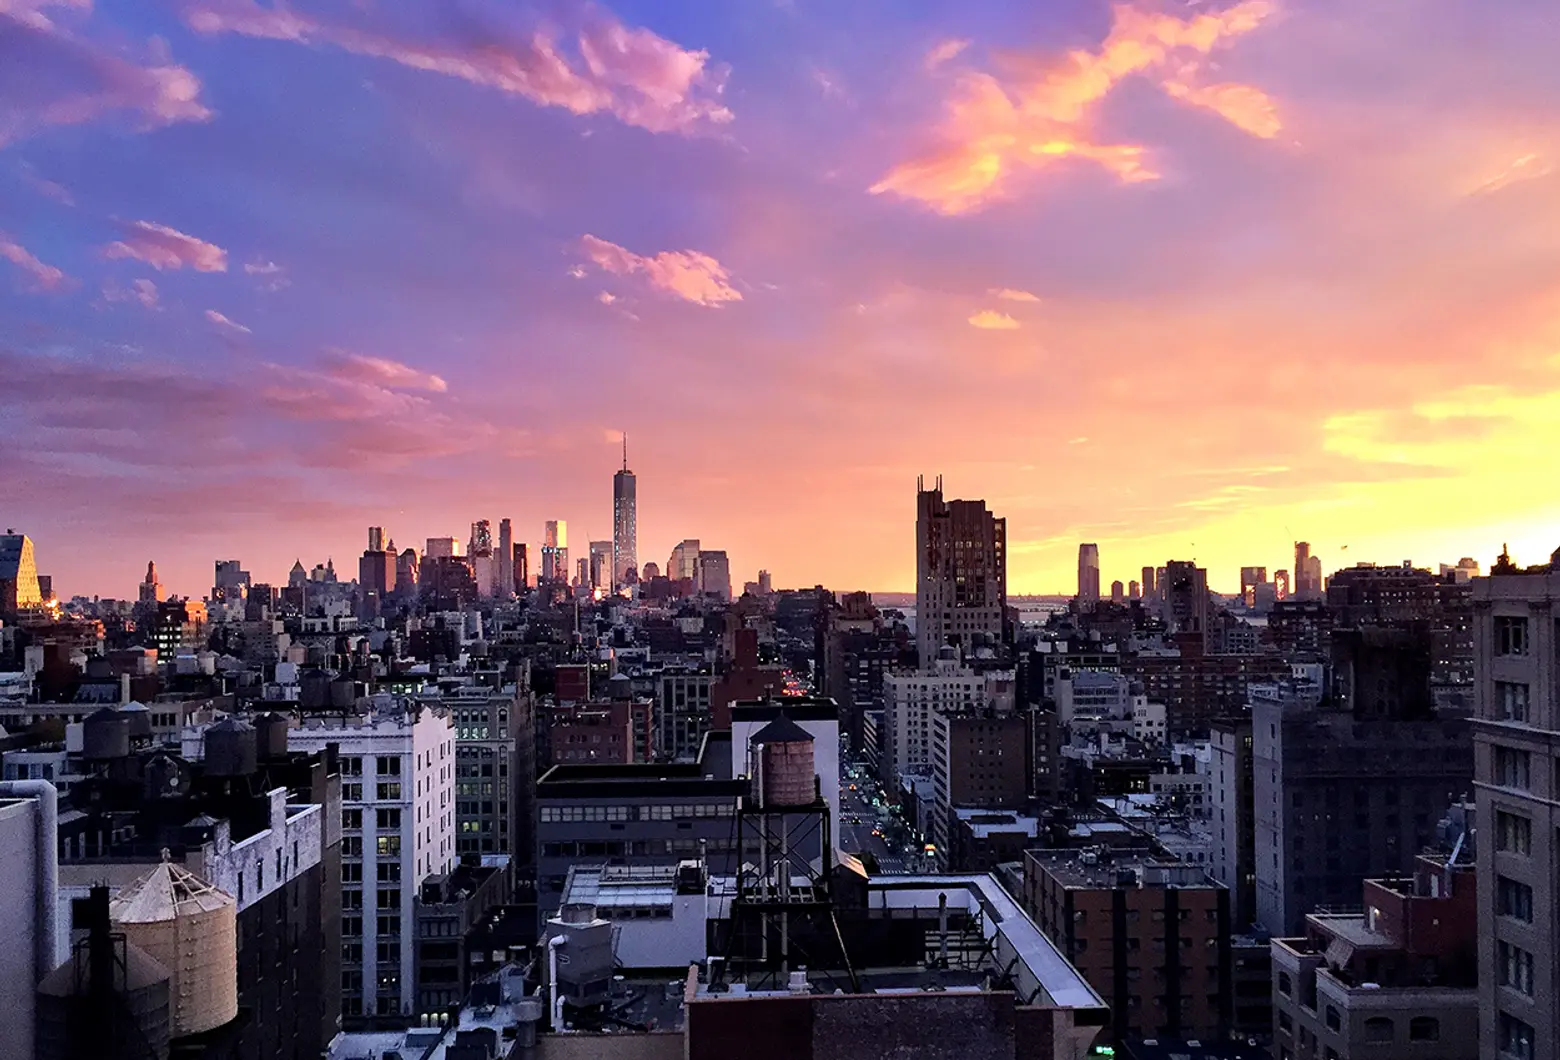 No Filter Needed: Watch NYC Glow Against an Otherworldly Autumn Sunset